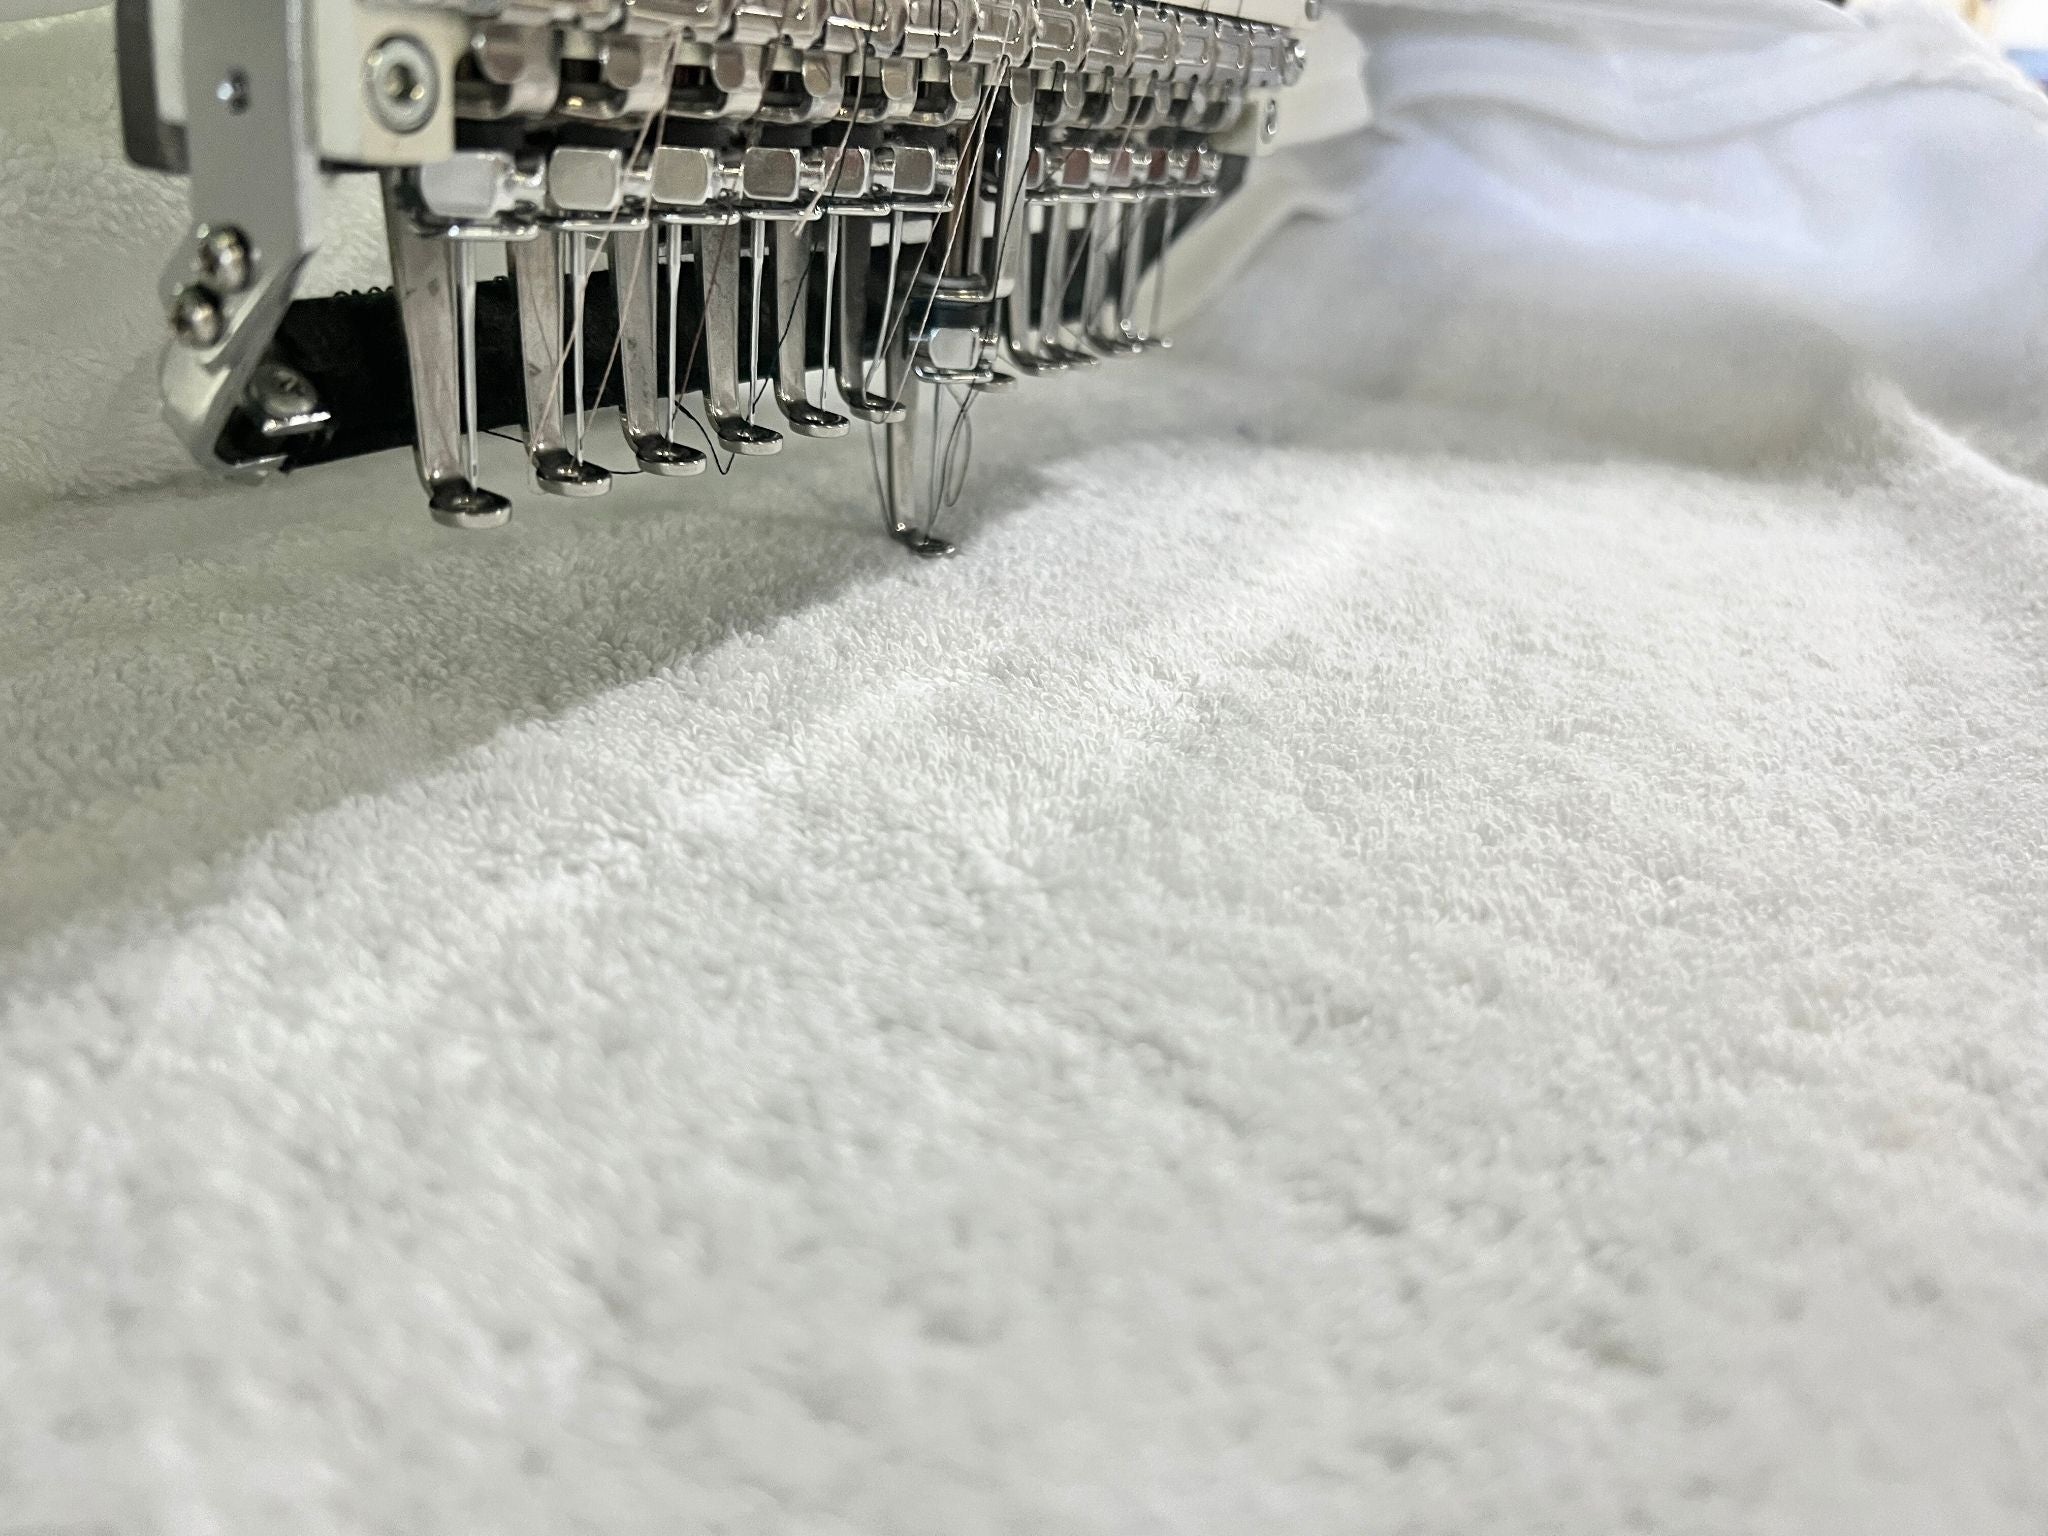 Discover special embroidery possibilities for your textiles with Globaltex Fine Linens!